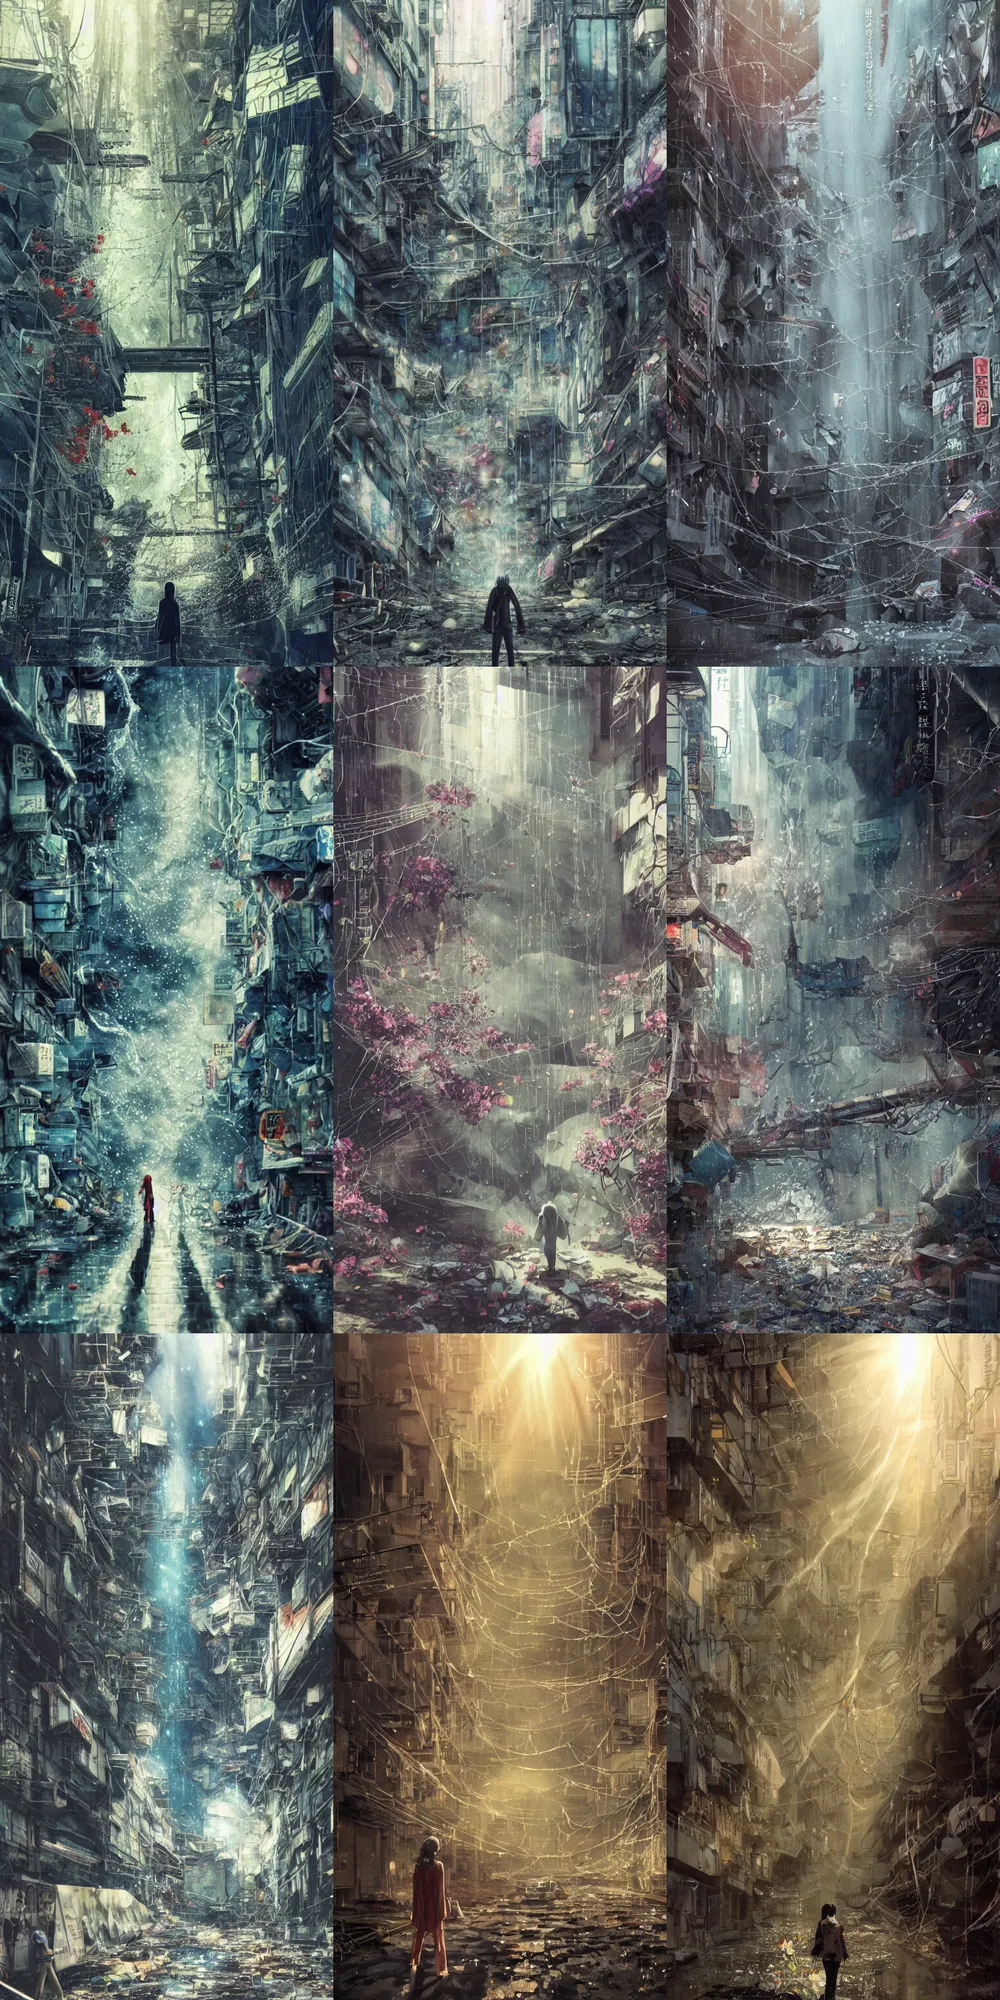 Prompt: anime movie scene, mamoru oshii, otomo, ultra wide, vanishing point, hoody woman explorer, watercolor, chasm, collapse, sinkhole, spiderwebs, flowers, dripping, waterfall, billboards, sun beam, dusty volumetric light, back lit, paper texture, puddles, deserted shinjuku junk, brutalist, golden ratio composition, hues